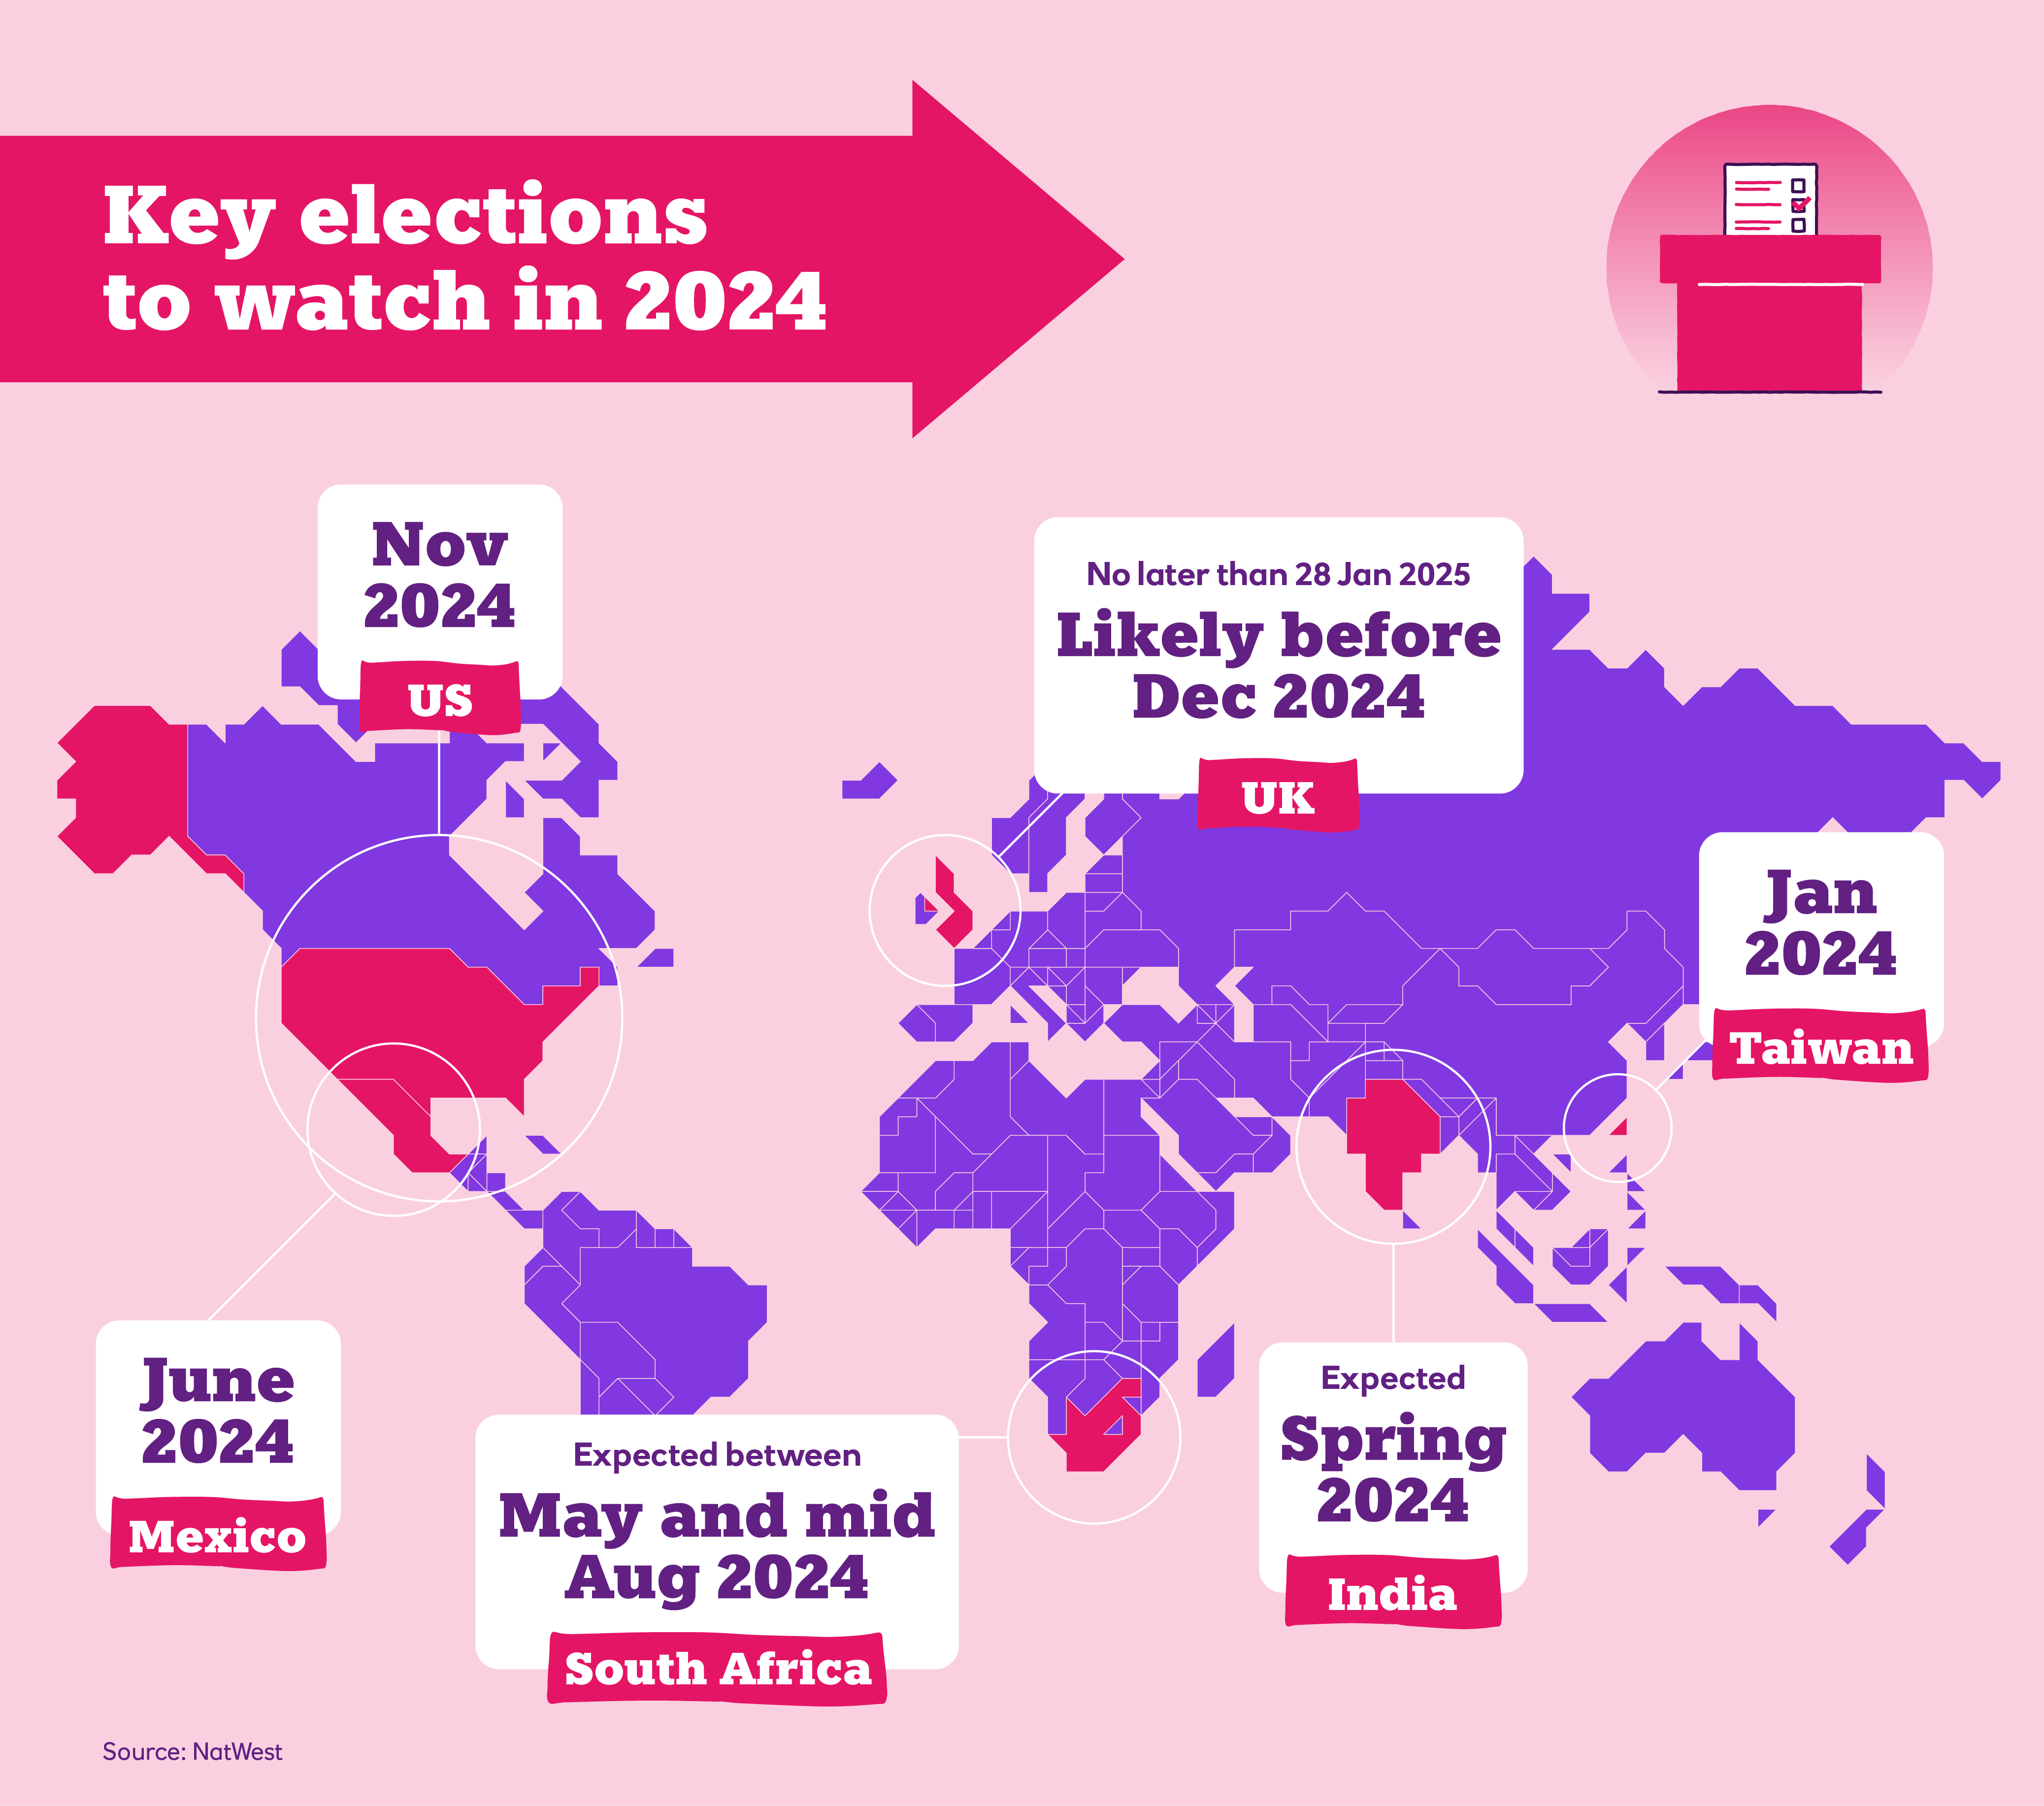 The Year of the Ballot Box how might elections sway policy? NatWest